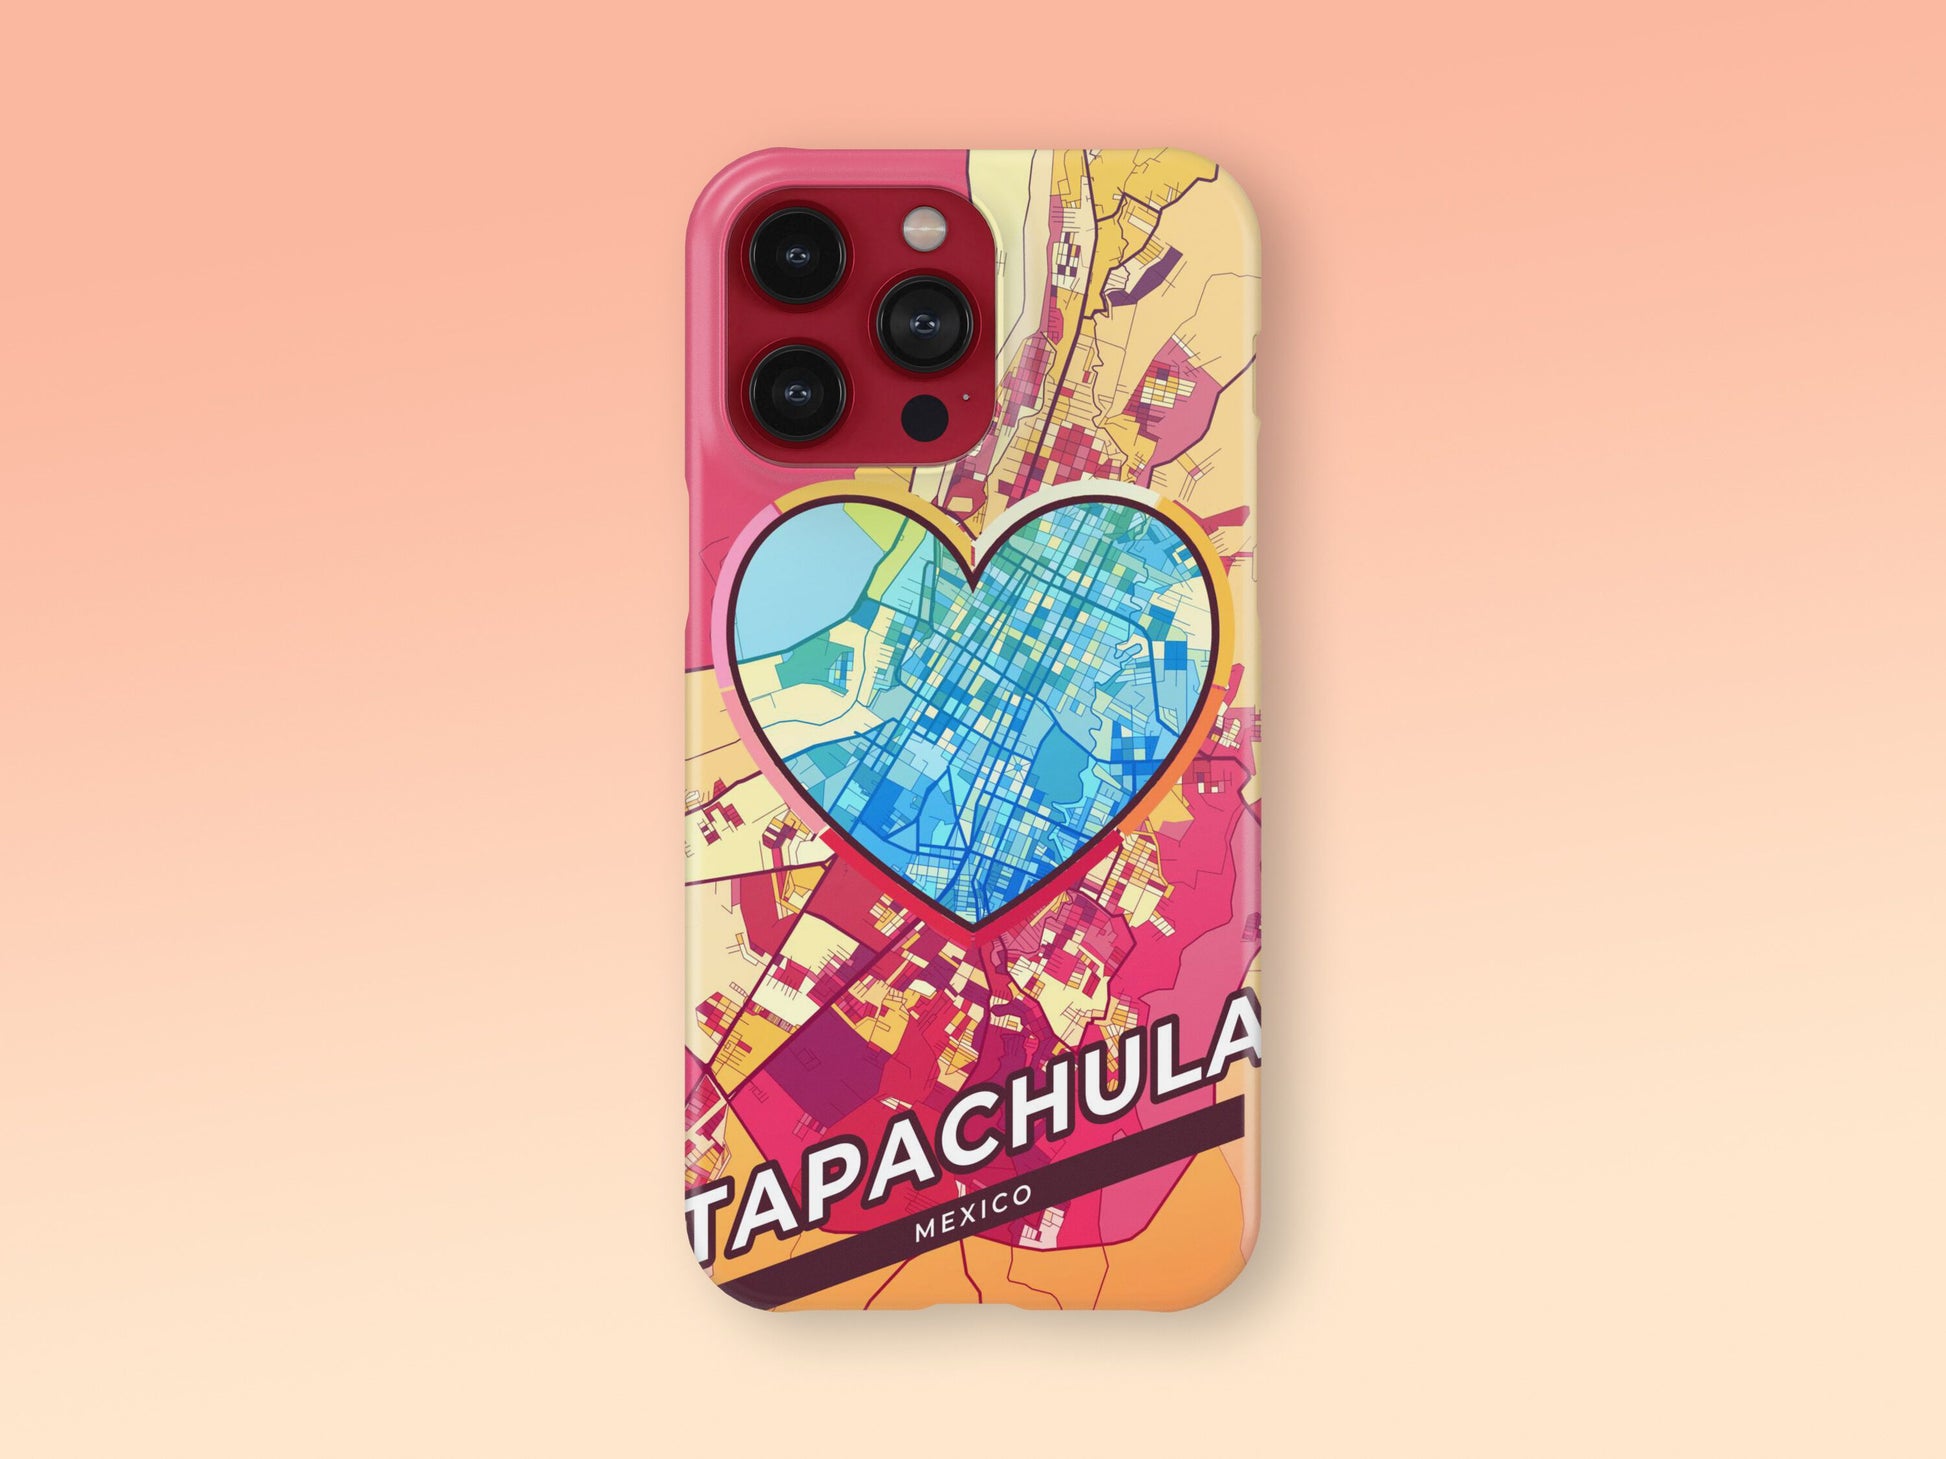 Tapachula Mexico slim phone case with colorful icon 2